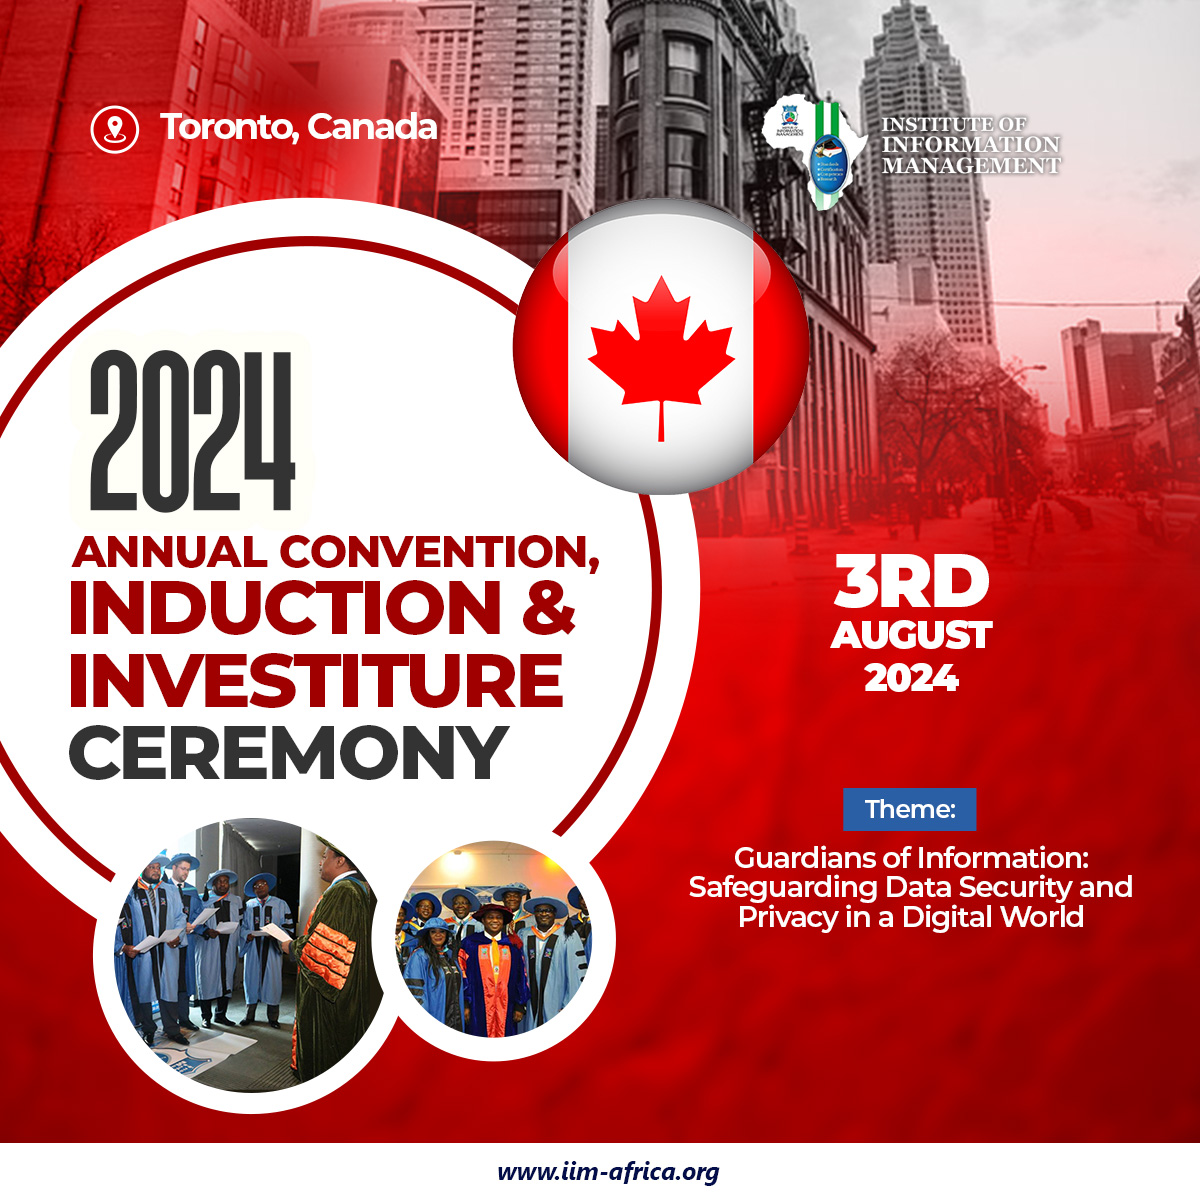 2023-Canada-Annual-Convention-Induction-Investiture